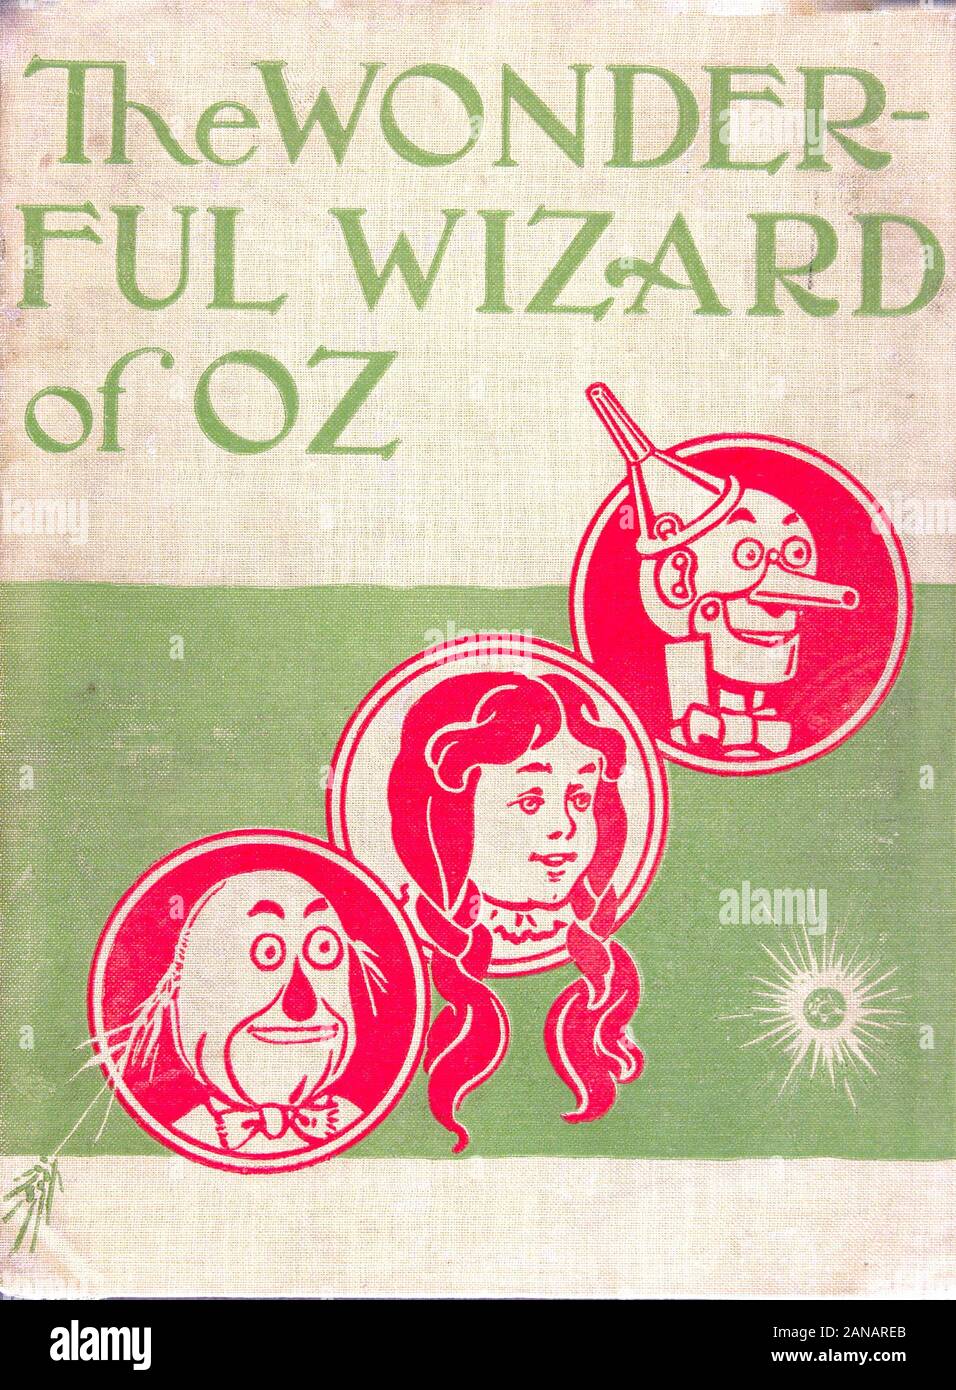 THE WONDERFUL WIZARD OF OZ  by L. Frank Baum. Back cover of the 1900 first edition. Stock Photo